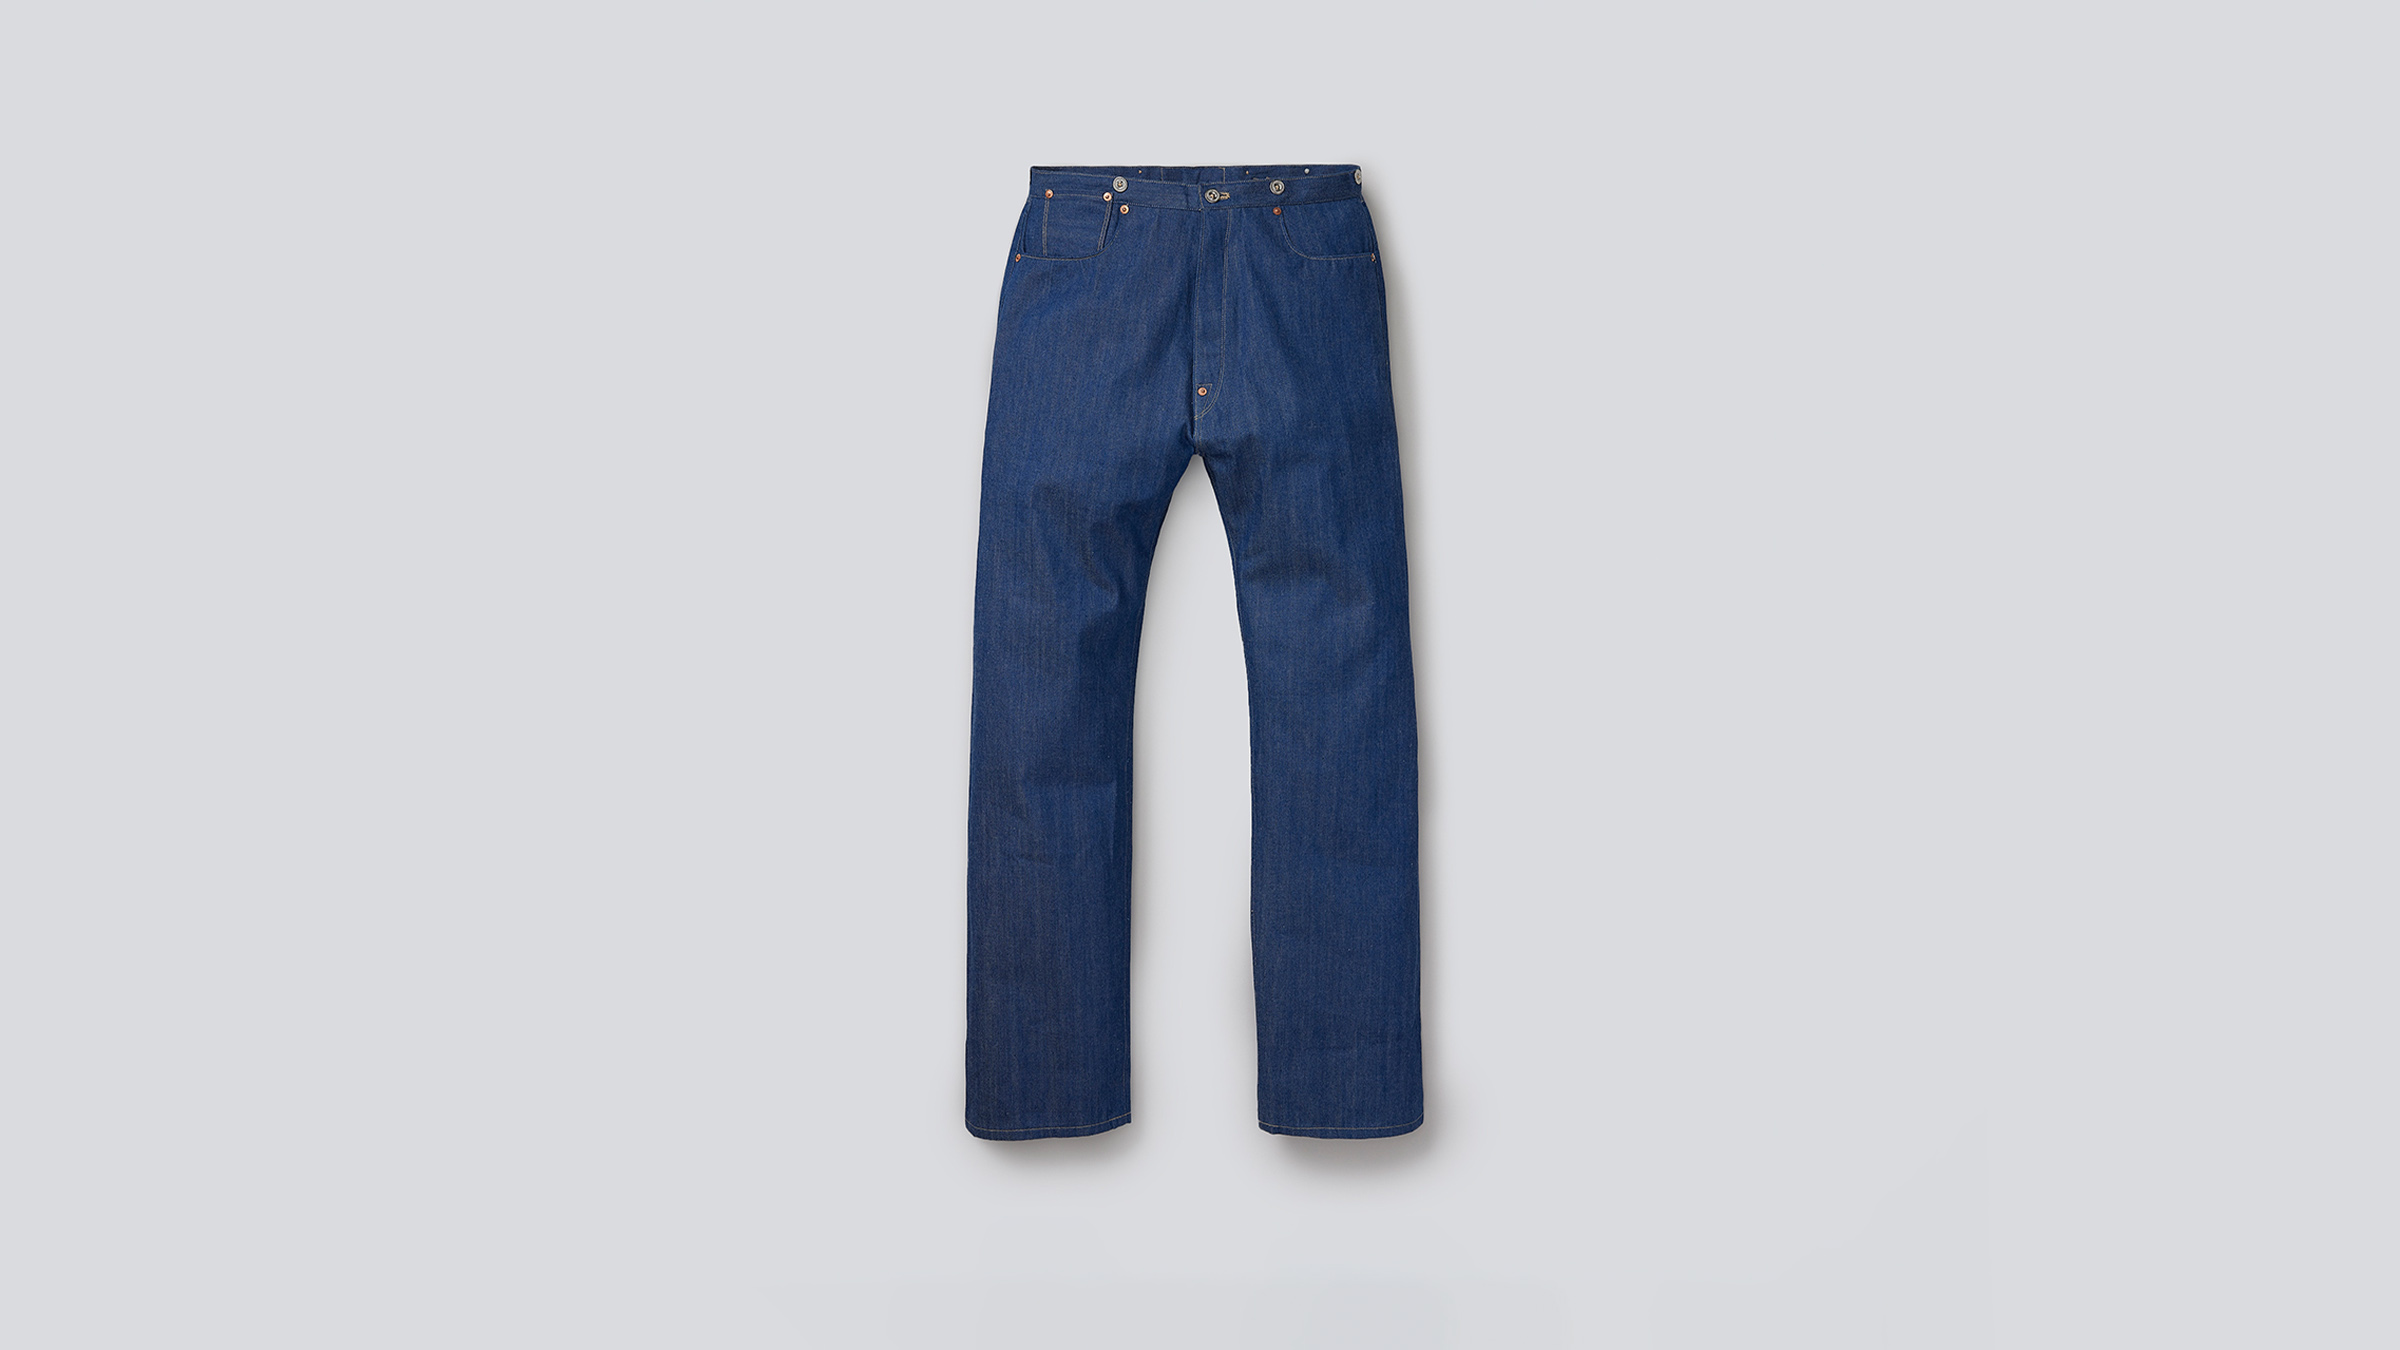 LEVIS VINTAGE CLOTHING LIMITED EDITION 1873 XX OVERALL — LEVI'S